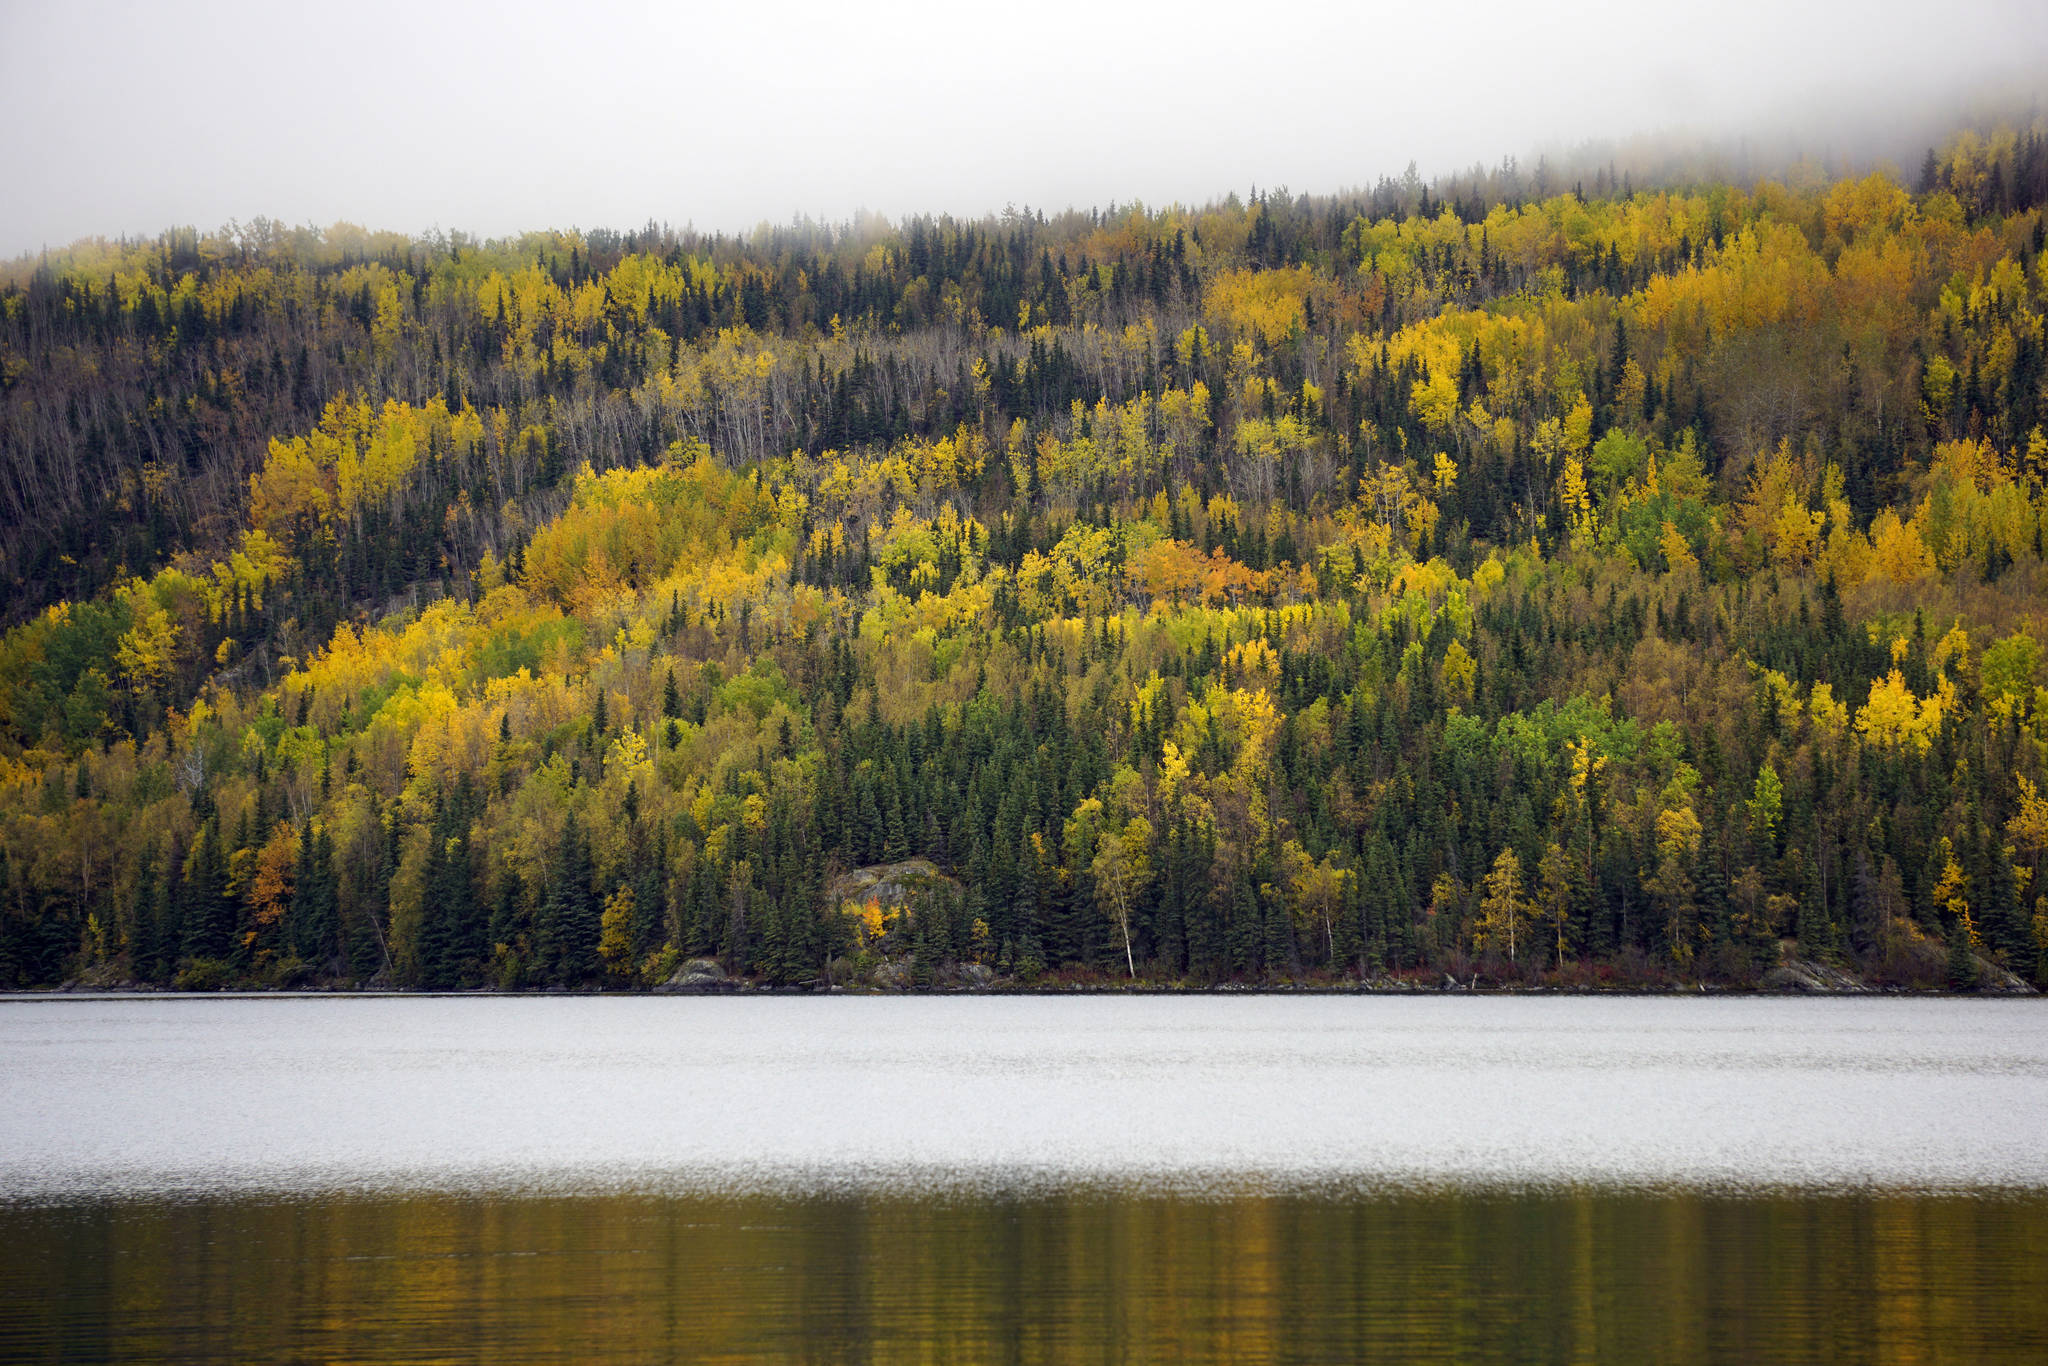 Birch trees offer a splash of fall color by Hidden Lake in the Kenai National Wildlife Refuge on Saturday, Sept. 29, 2018, near Sterling, Alaska. (Photo by Michael Armstrong/Homer News)